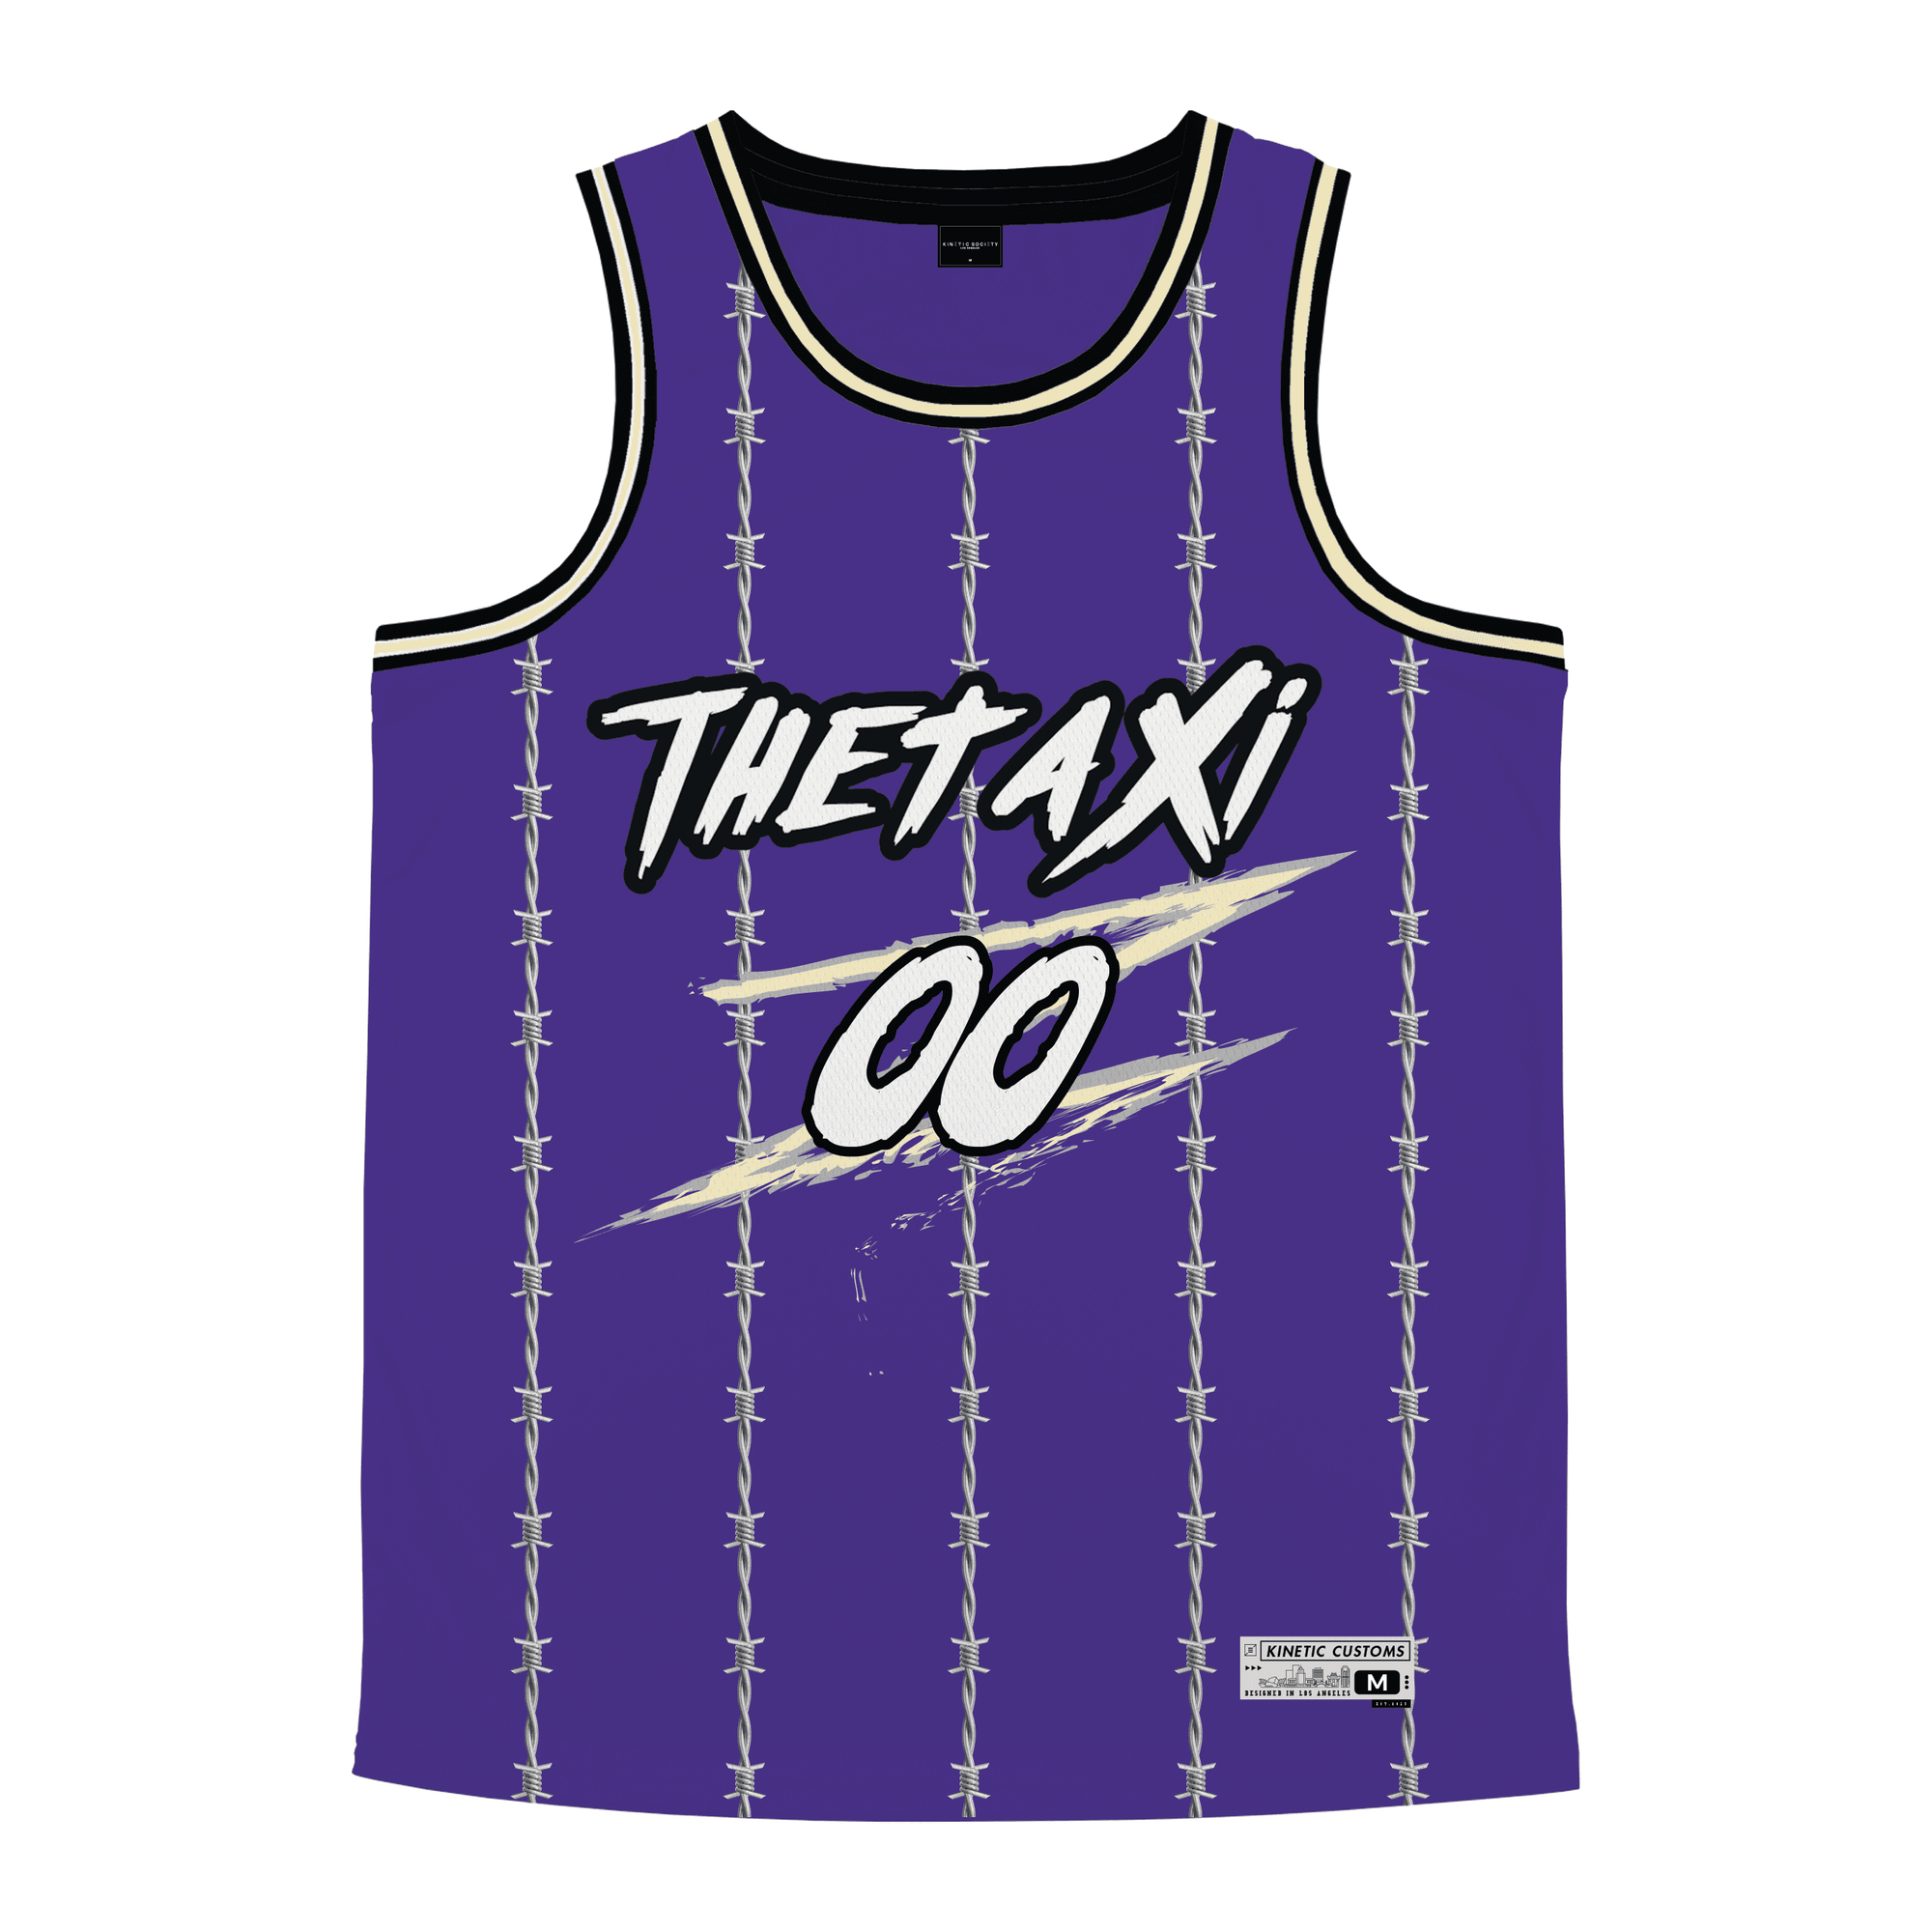 Theta Xi - Barbed Wire Basketball Jersey